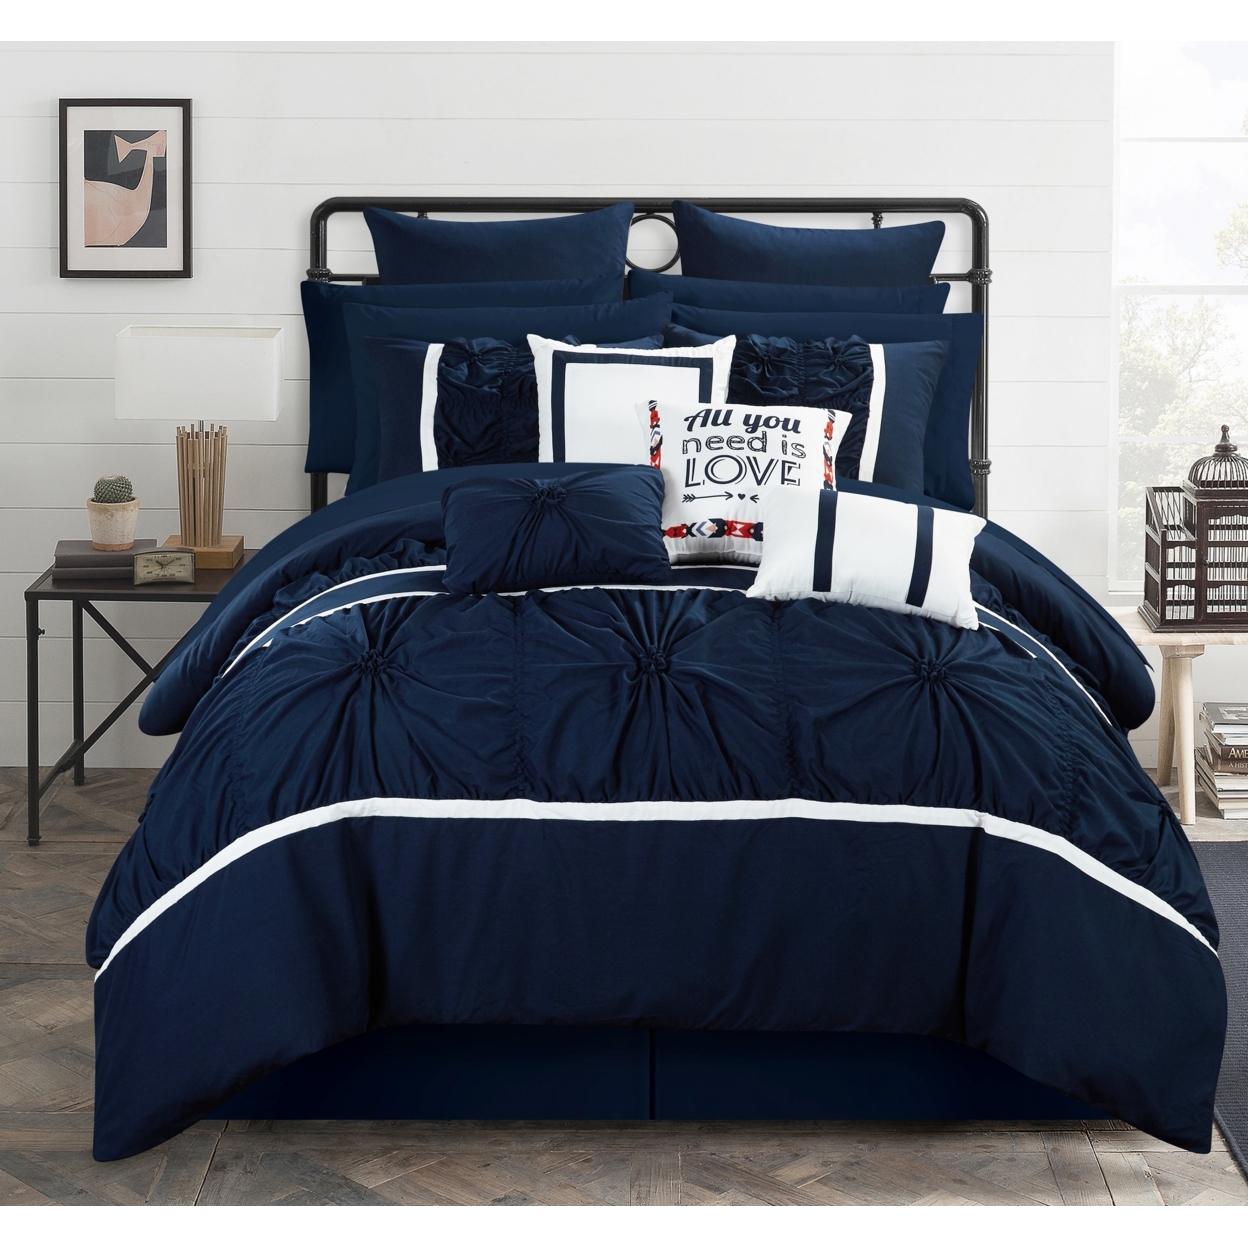 Chic Home 16 Piece Ash Floral Pinch Pleat Ruffled Designer Embellished Comforter Set With Sheet Set - Navy, Queen